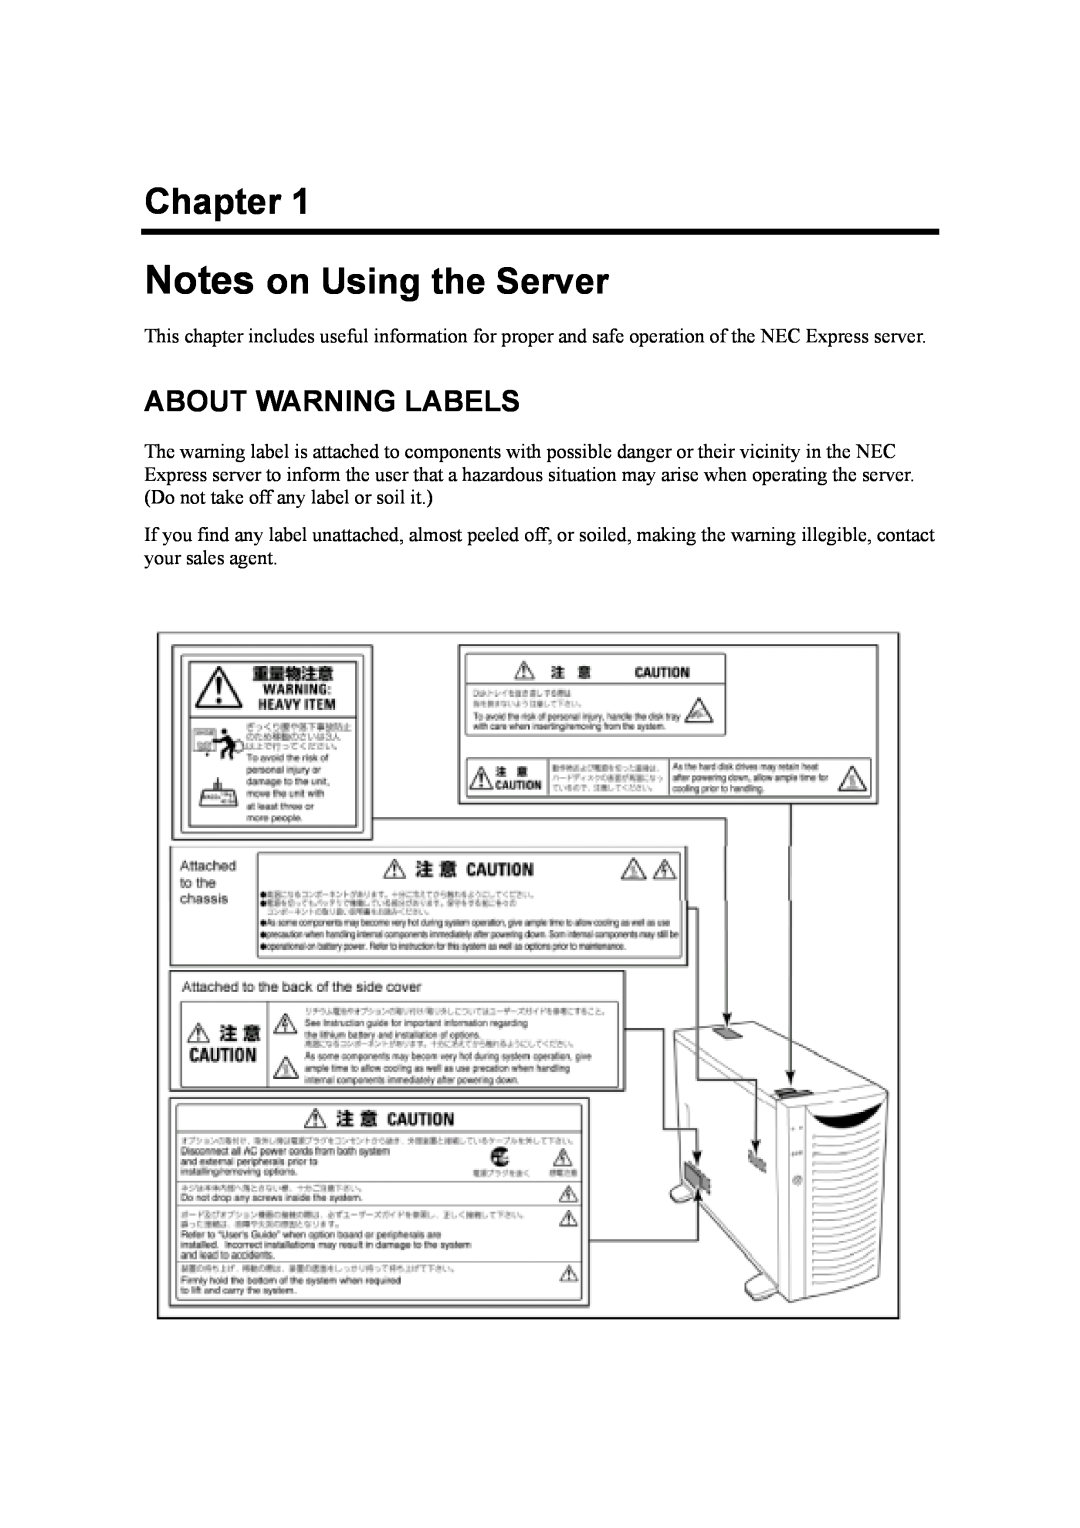 NEC 120Mf, 5800 manual Chapter, Notes on Using the Server, About Warning Labels 